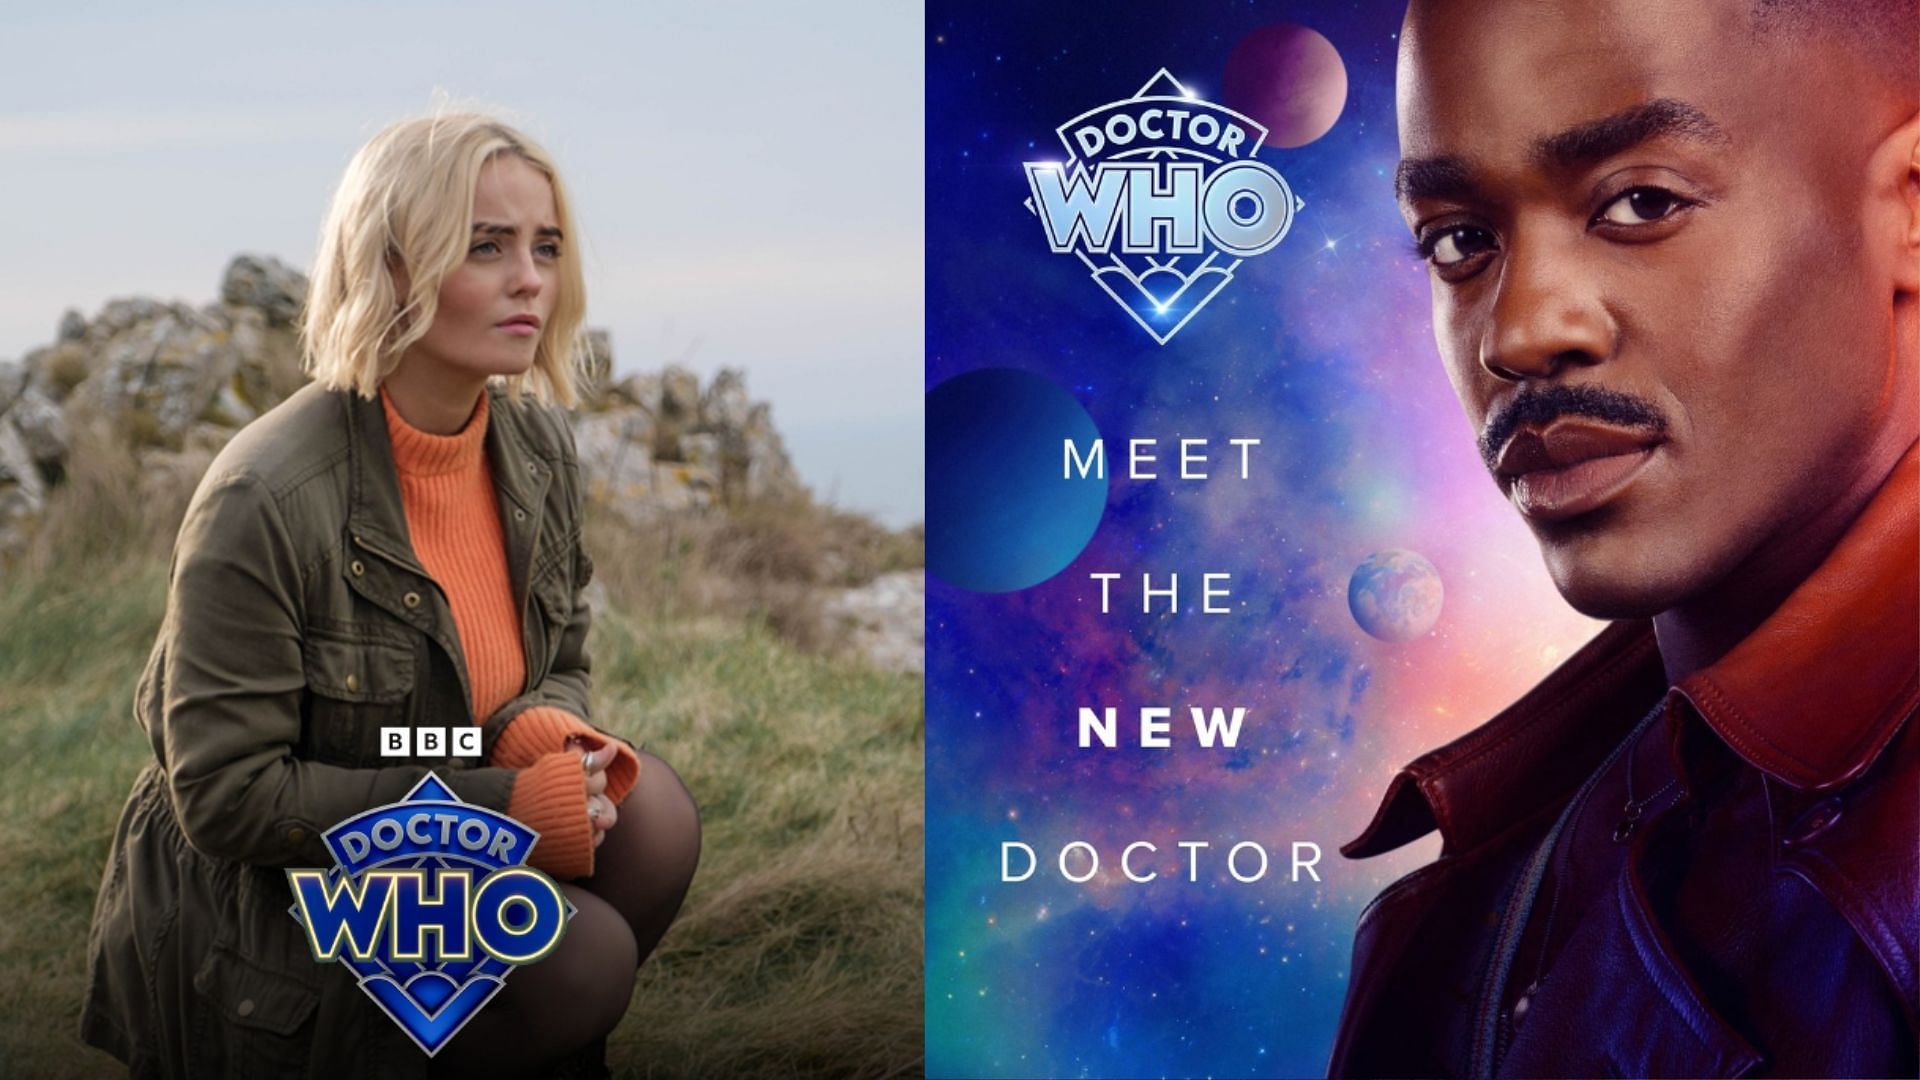 Why The Doctor is not the protagonist for Doctor Who season 14